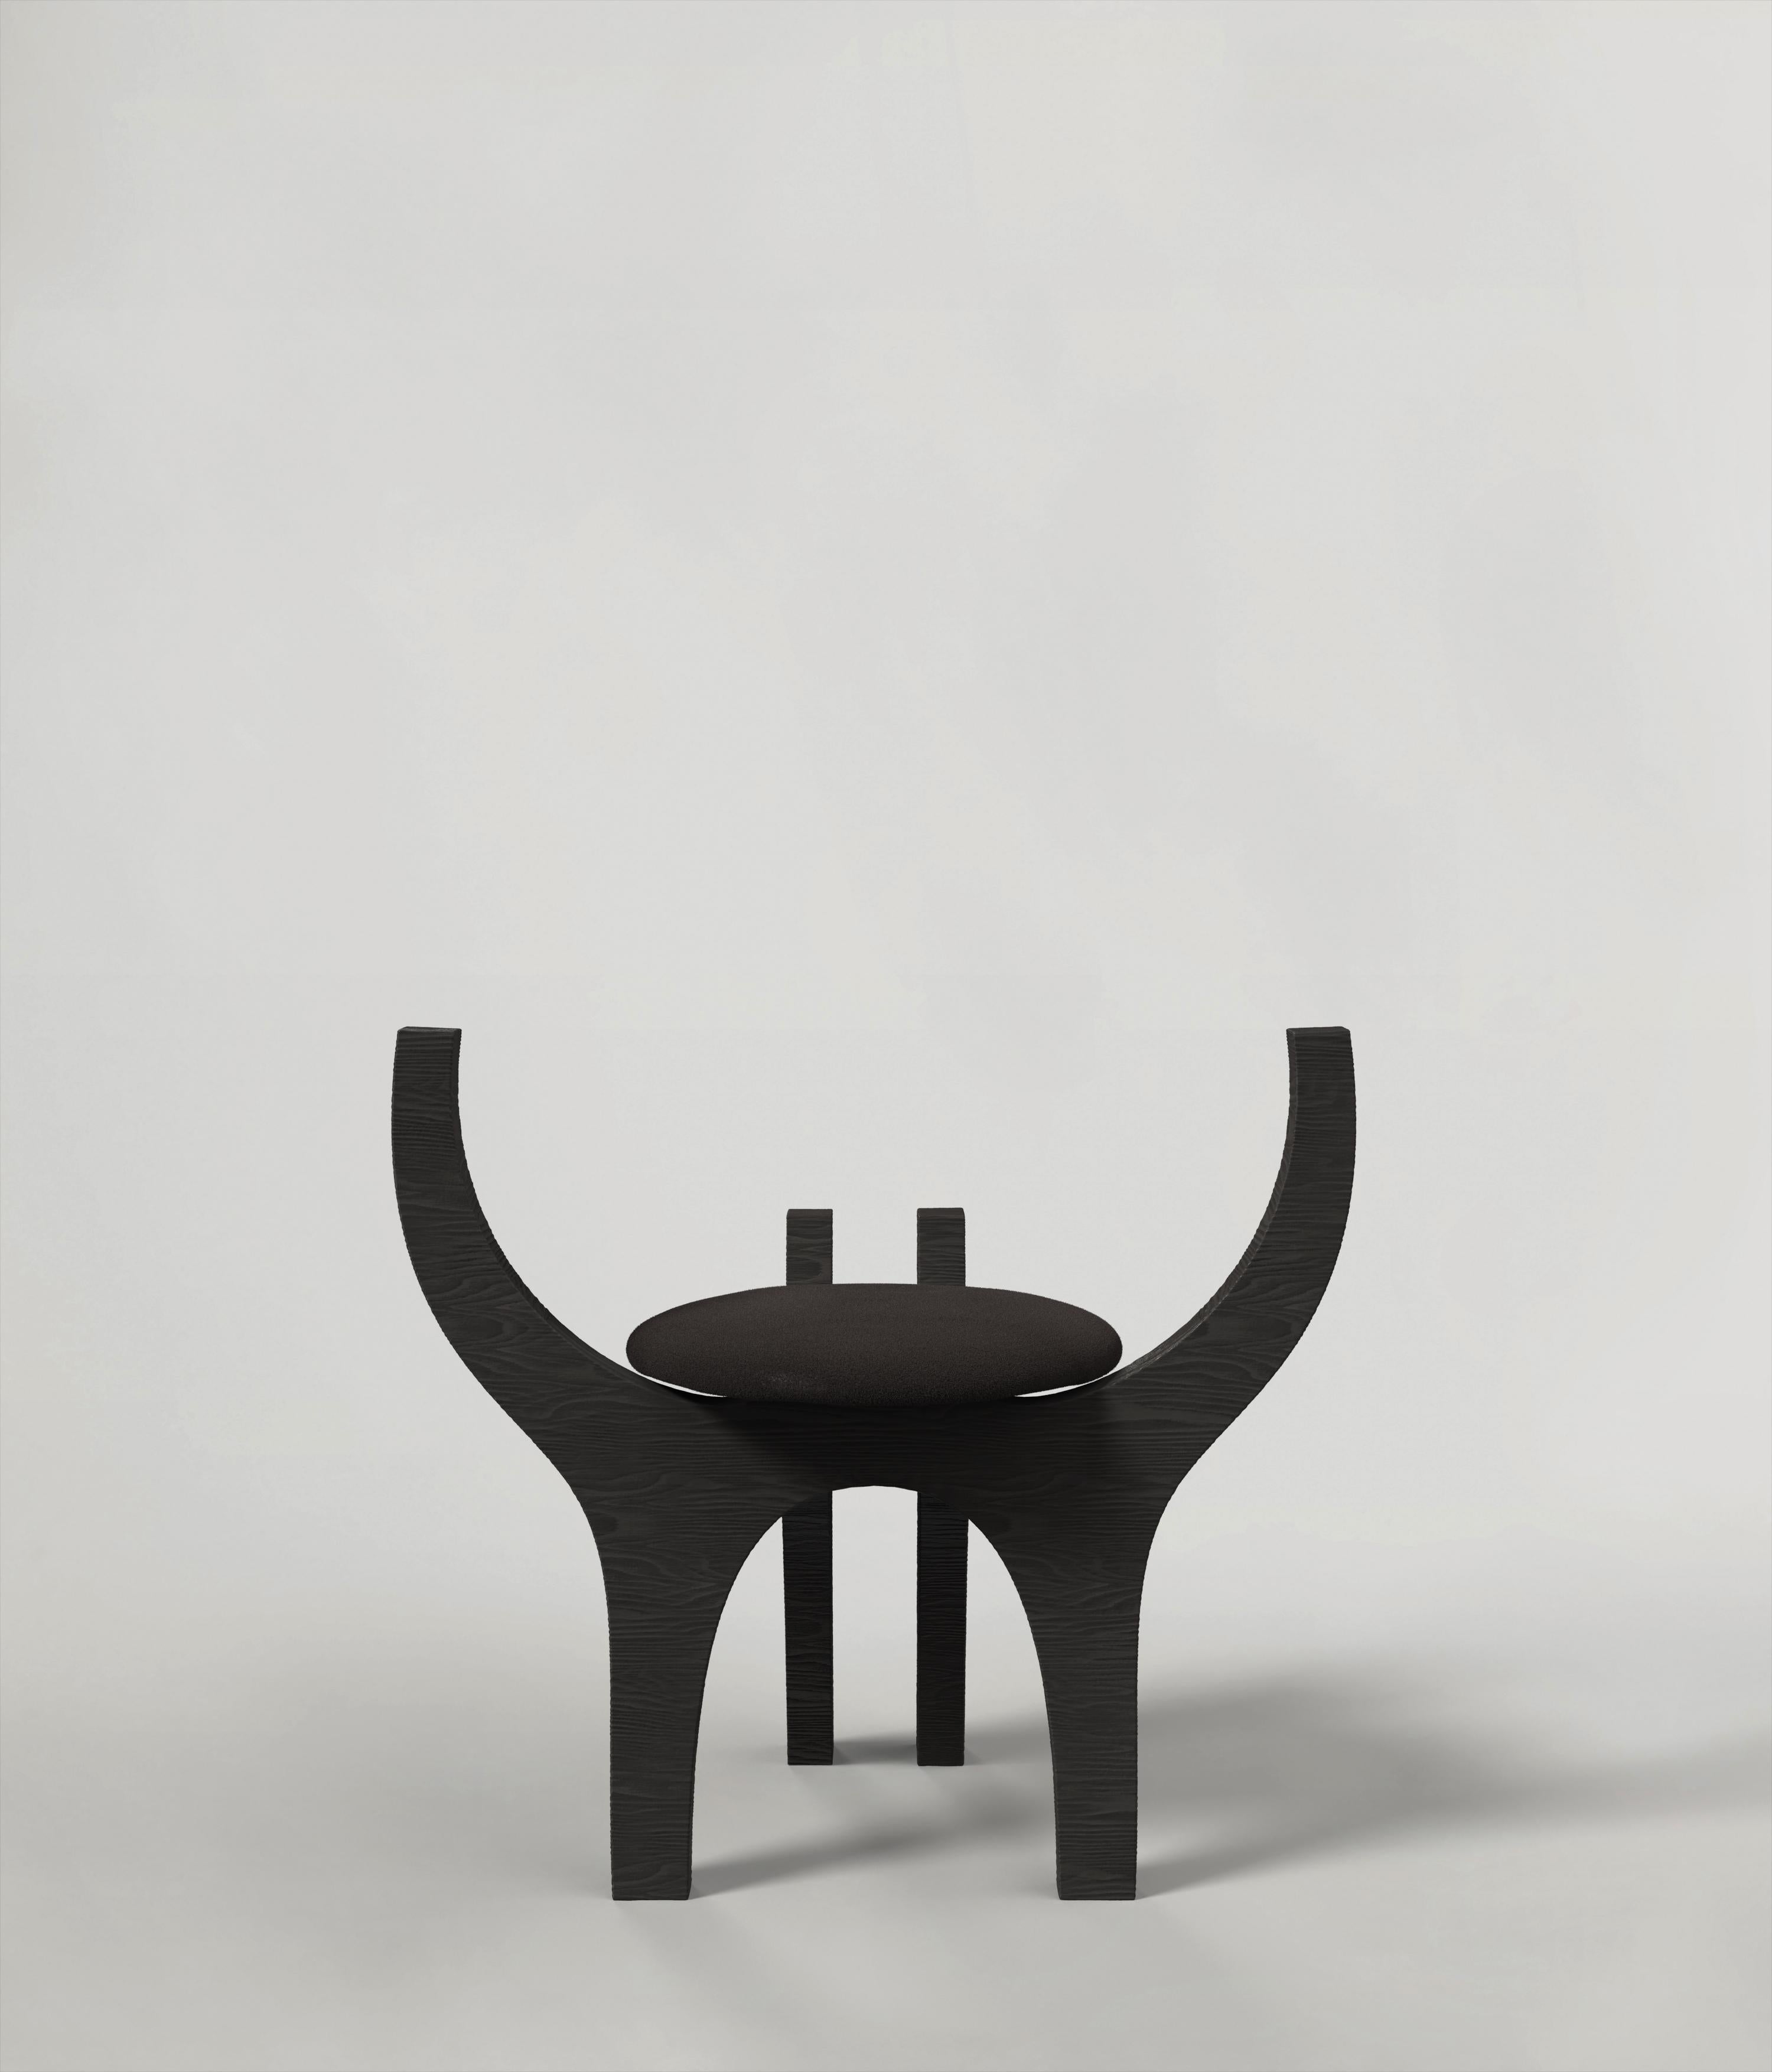 Zero V1 chair by Edizione Limitata
Limited Edition of 15+3 AP pieces. Signed and numbered.
Dimensions: D73 x W43 x H67 cm
Materials: Ebonized Wood+Black Velvet

Zero are 21st Century sculptural seatings made by young Italian artists in Ash Wood